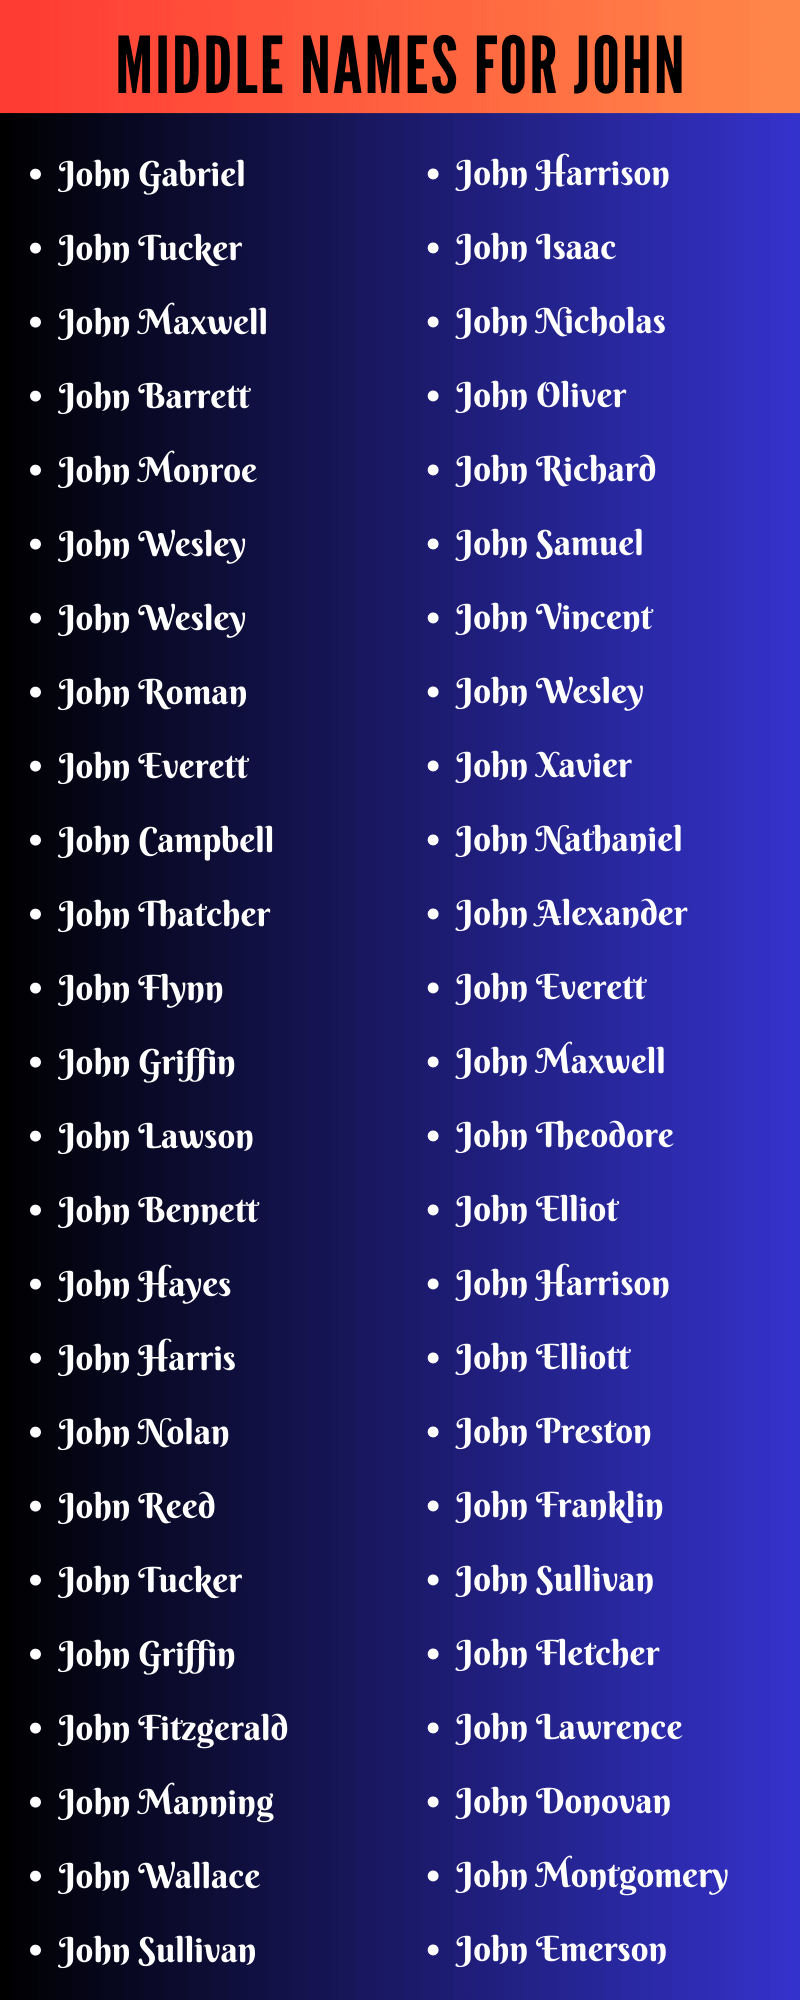 Middle Names For John